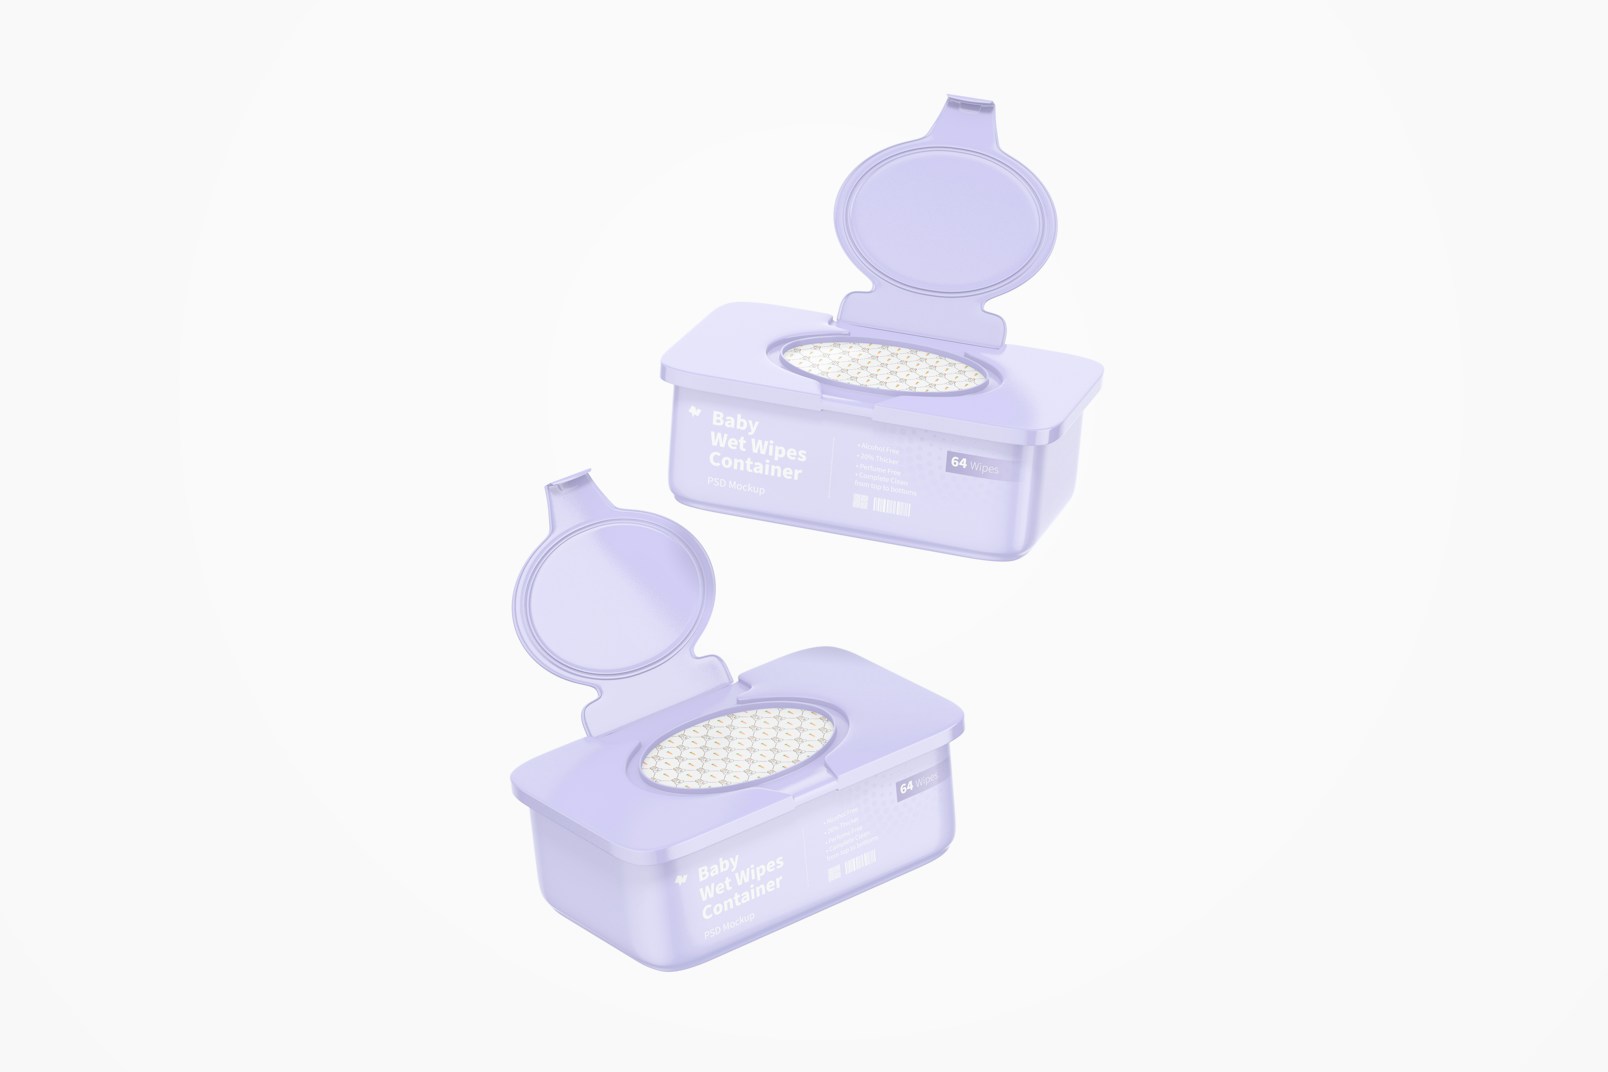 Baby Wet Wipes Containers Mockup, Floating